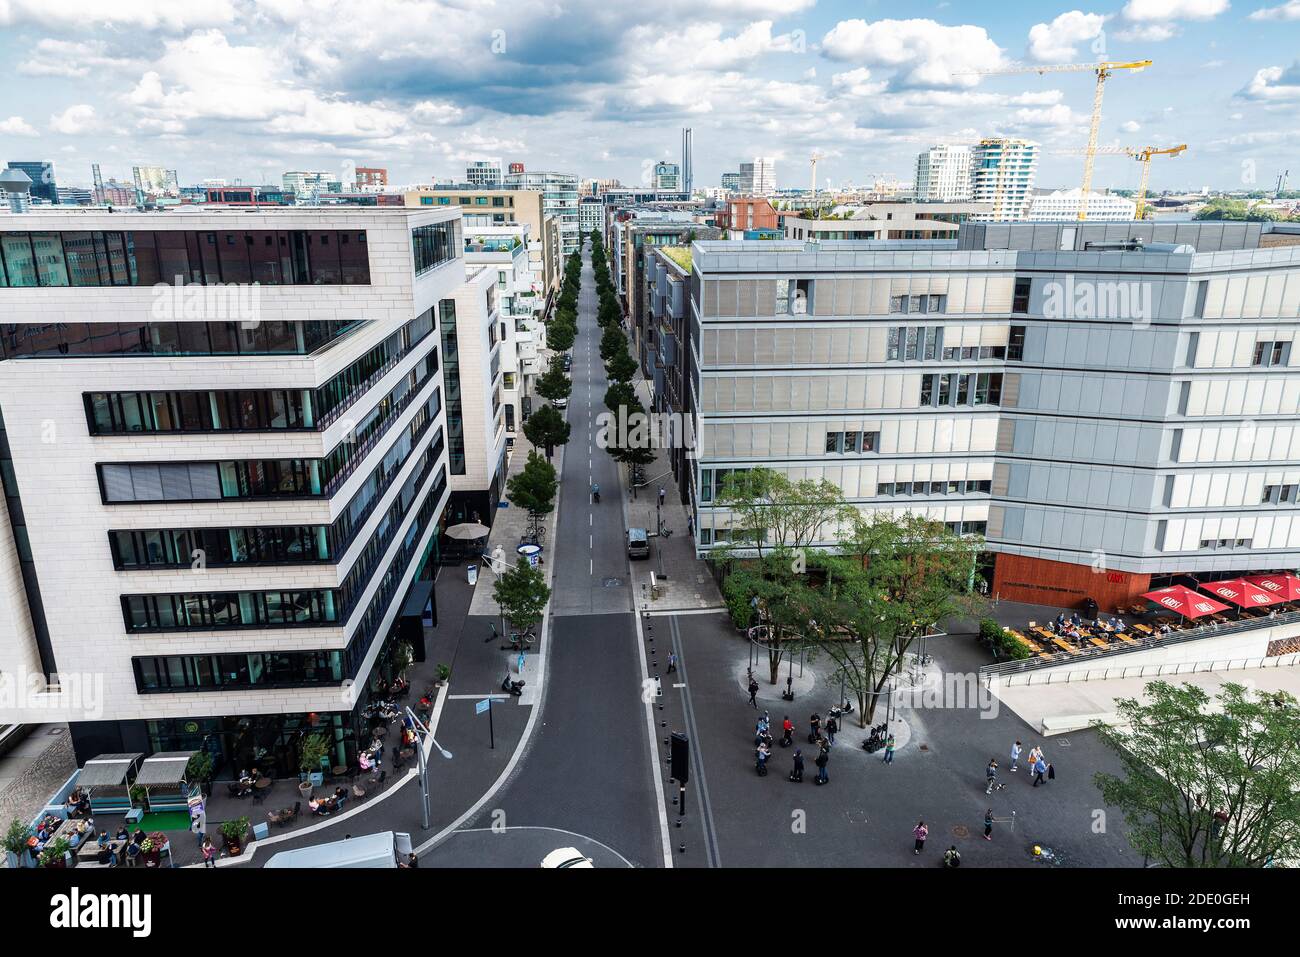 Hamburg, Germany - August 21, 2019: Overview of a street with modern buildings, urban road with traffic and people around, in HafenCity, Hamburg, Germ Stock Photo